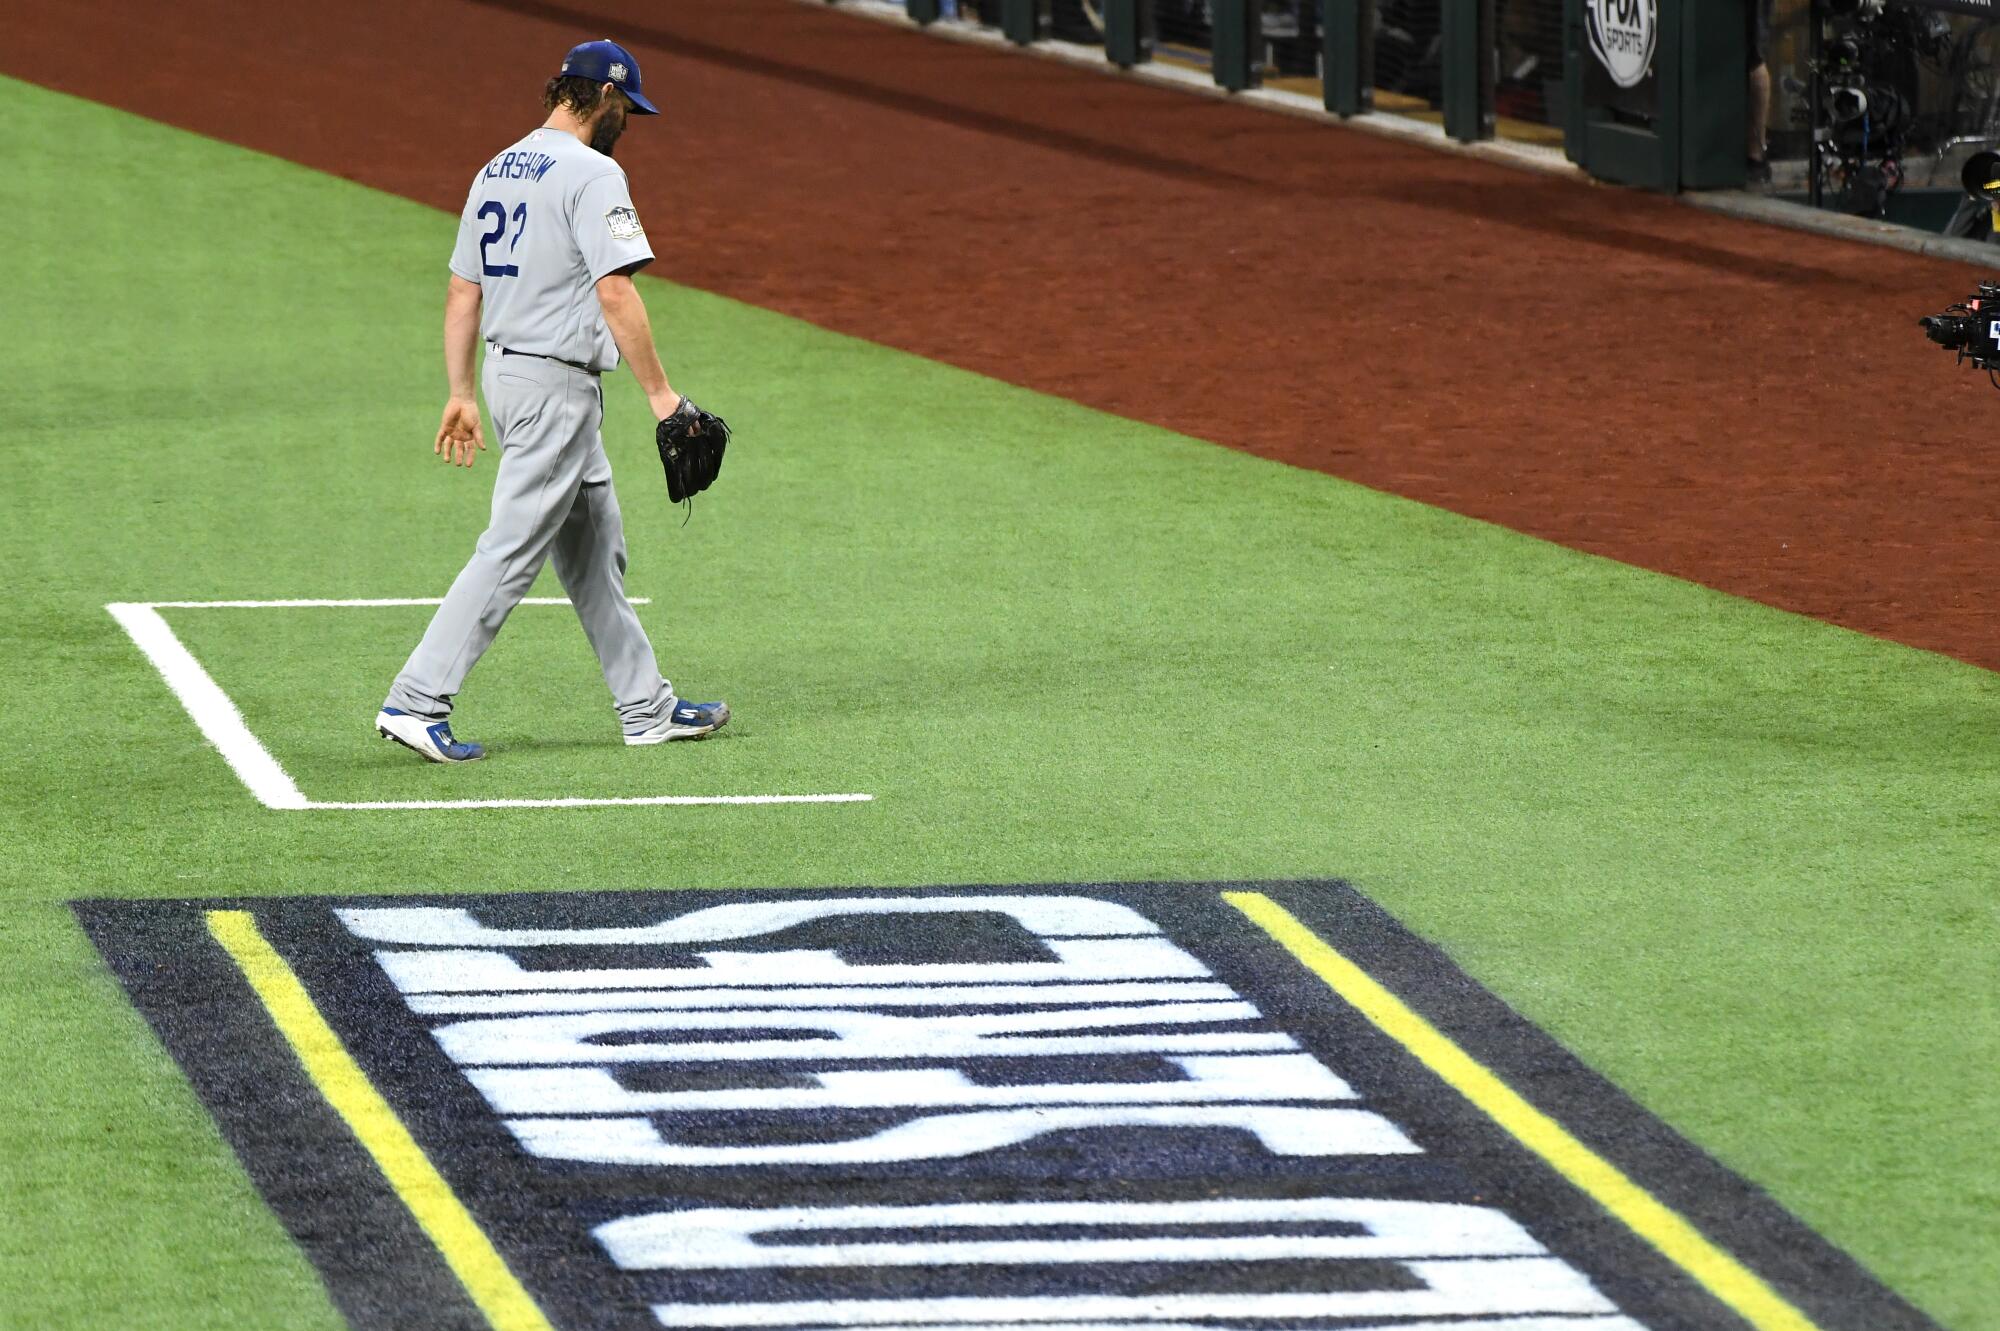 Clayton Kershaw walks to the dugout after pitching 5 2/3 innings for the Dodgers.